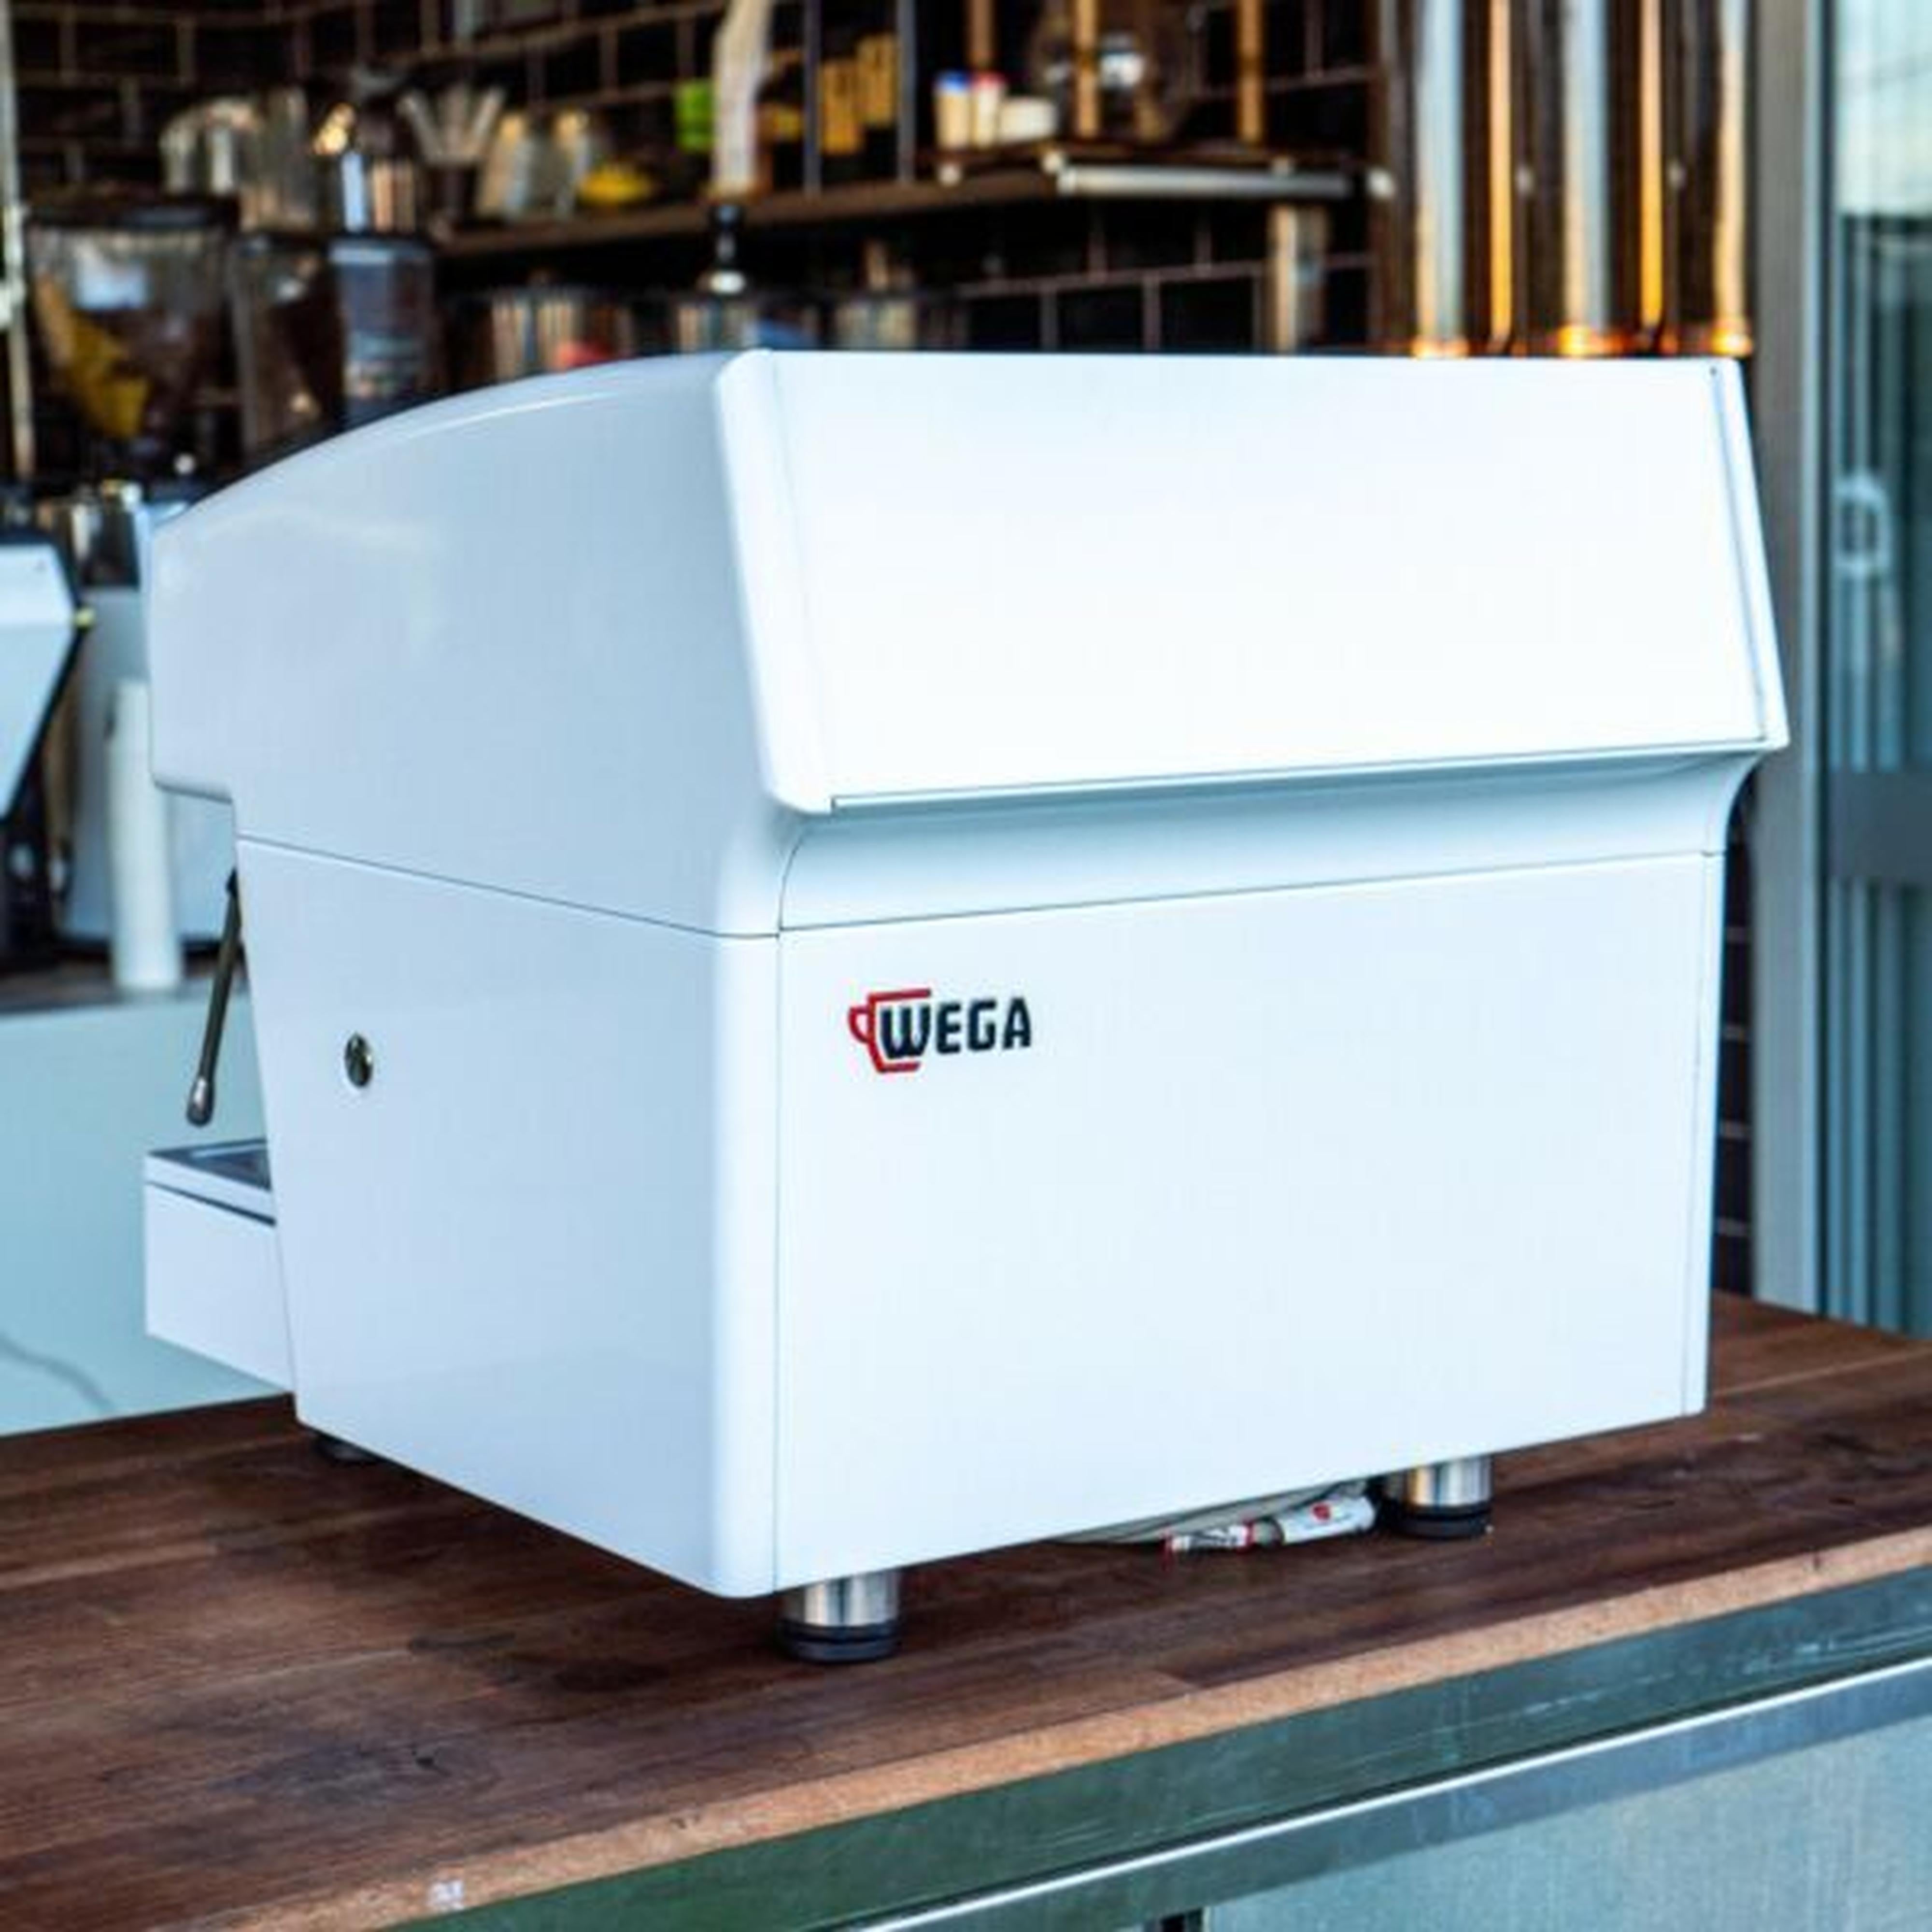 STUNNING 10 AMP COMPACT 2 GROUP WEGA COMMERCIAL COFFEE MACHINE